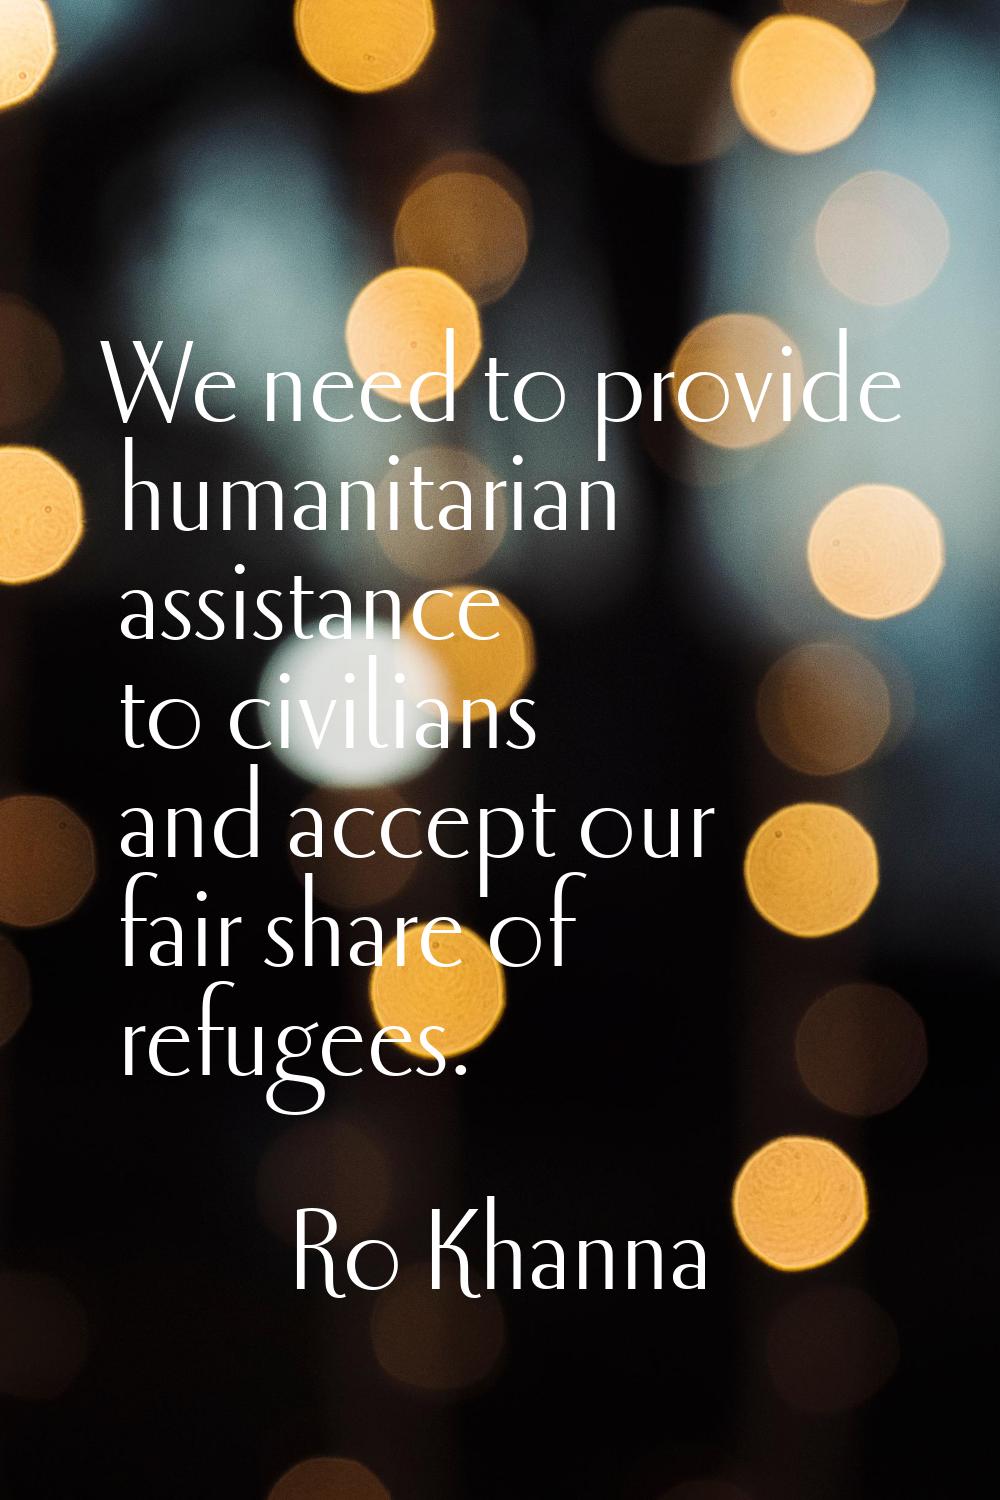 We need to provide humanitarian assistance to civilians and accept our fair share of refugees.